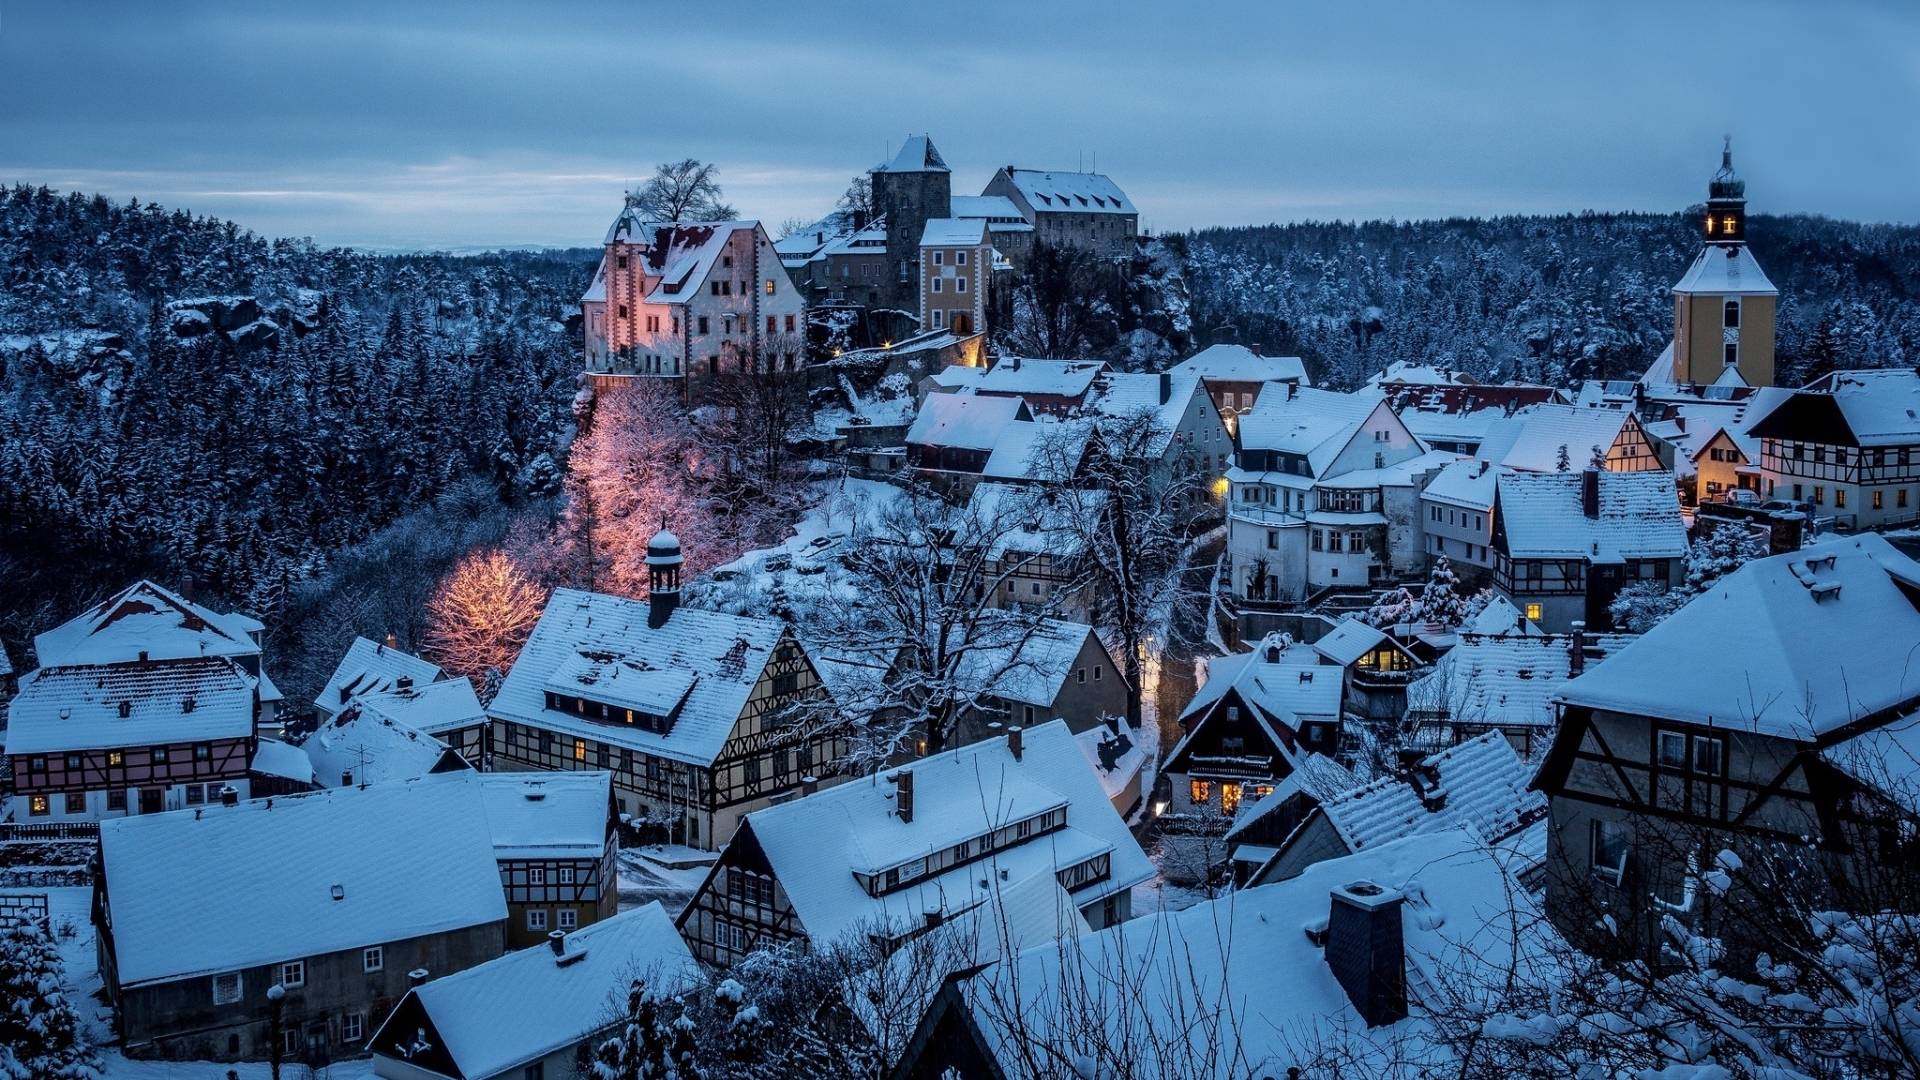 Hohnstein City Germany In Winter Snow 1080P Laptop Full HD Wallpaper, HD City 4K Wallpaper, Image, Photo and Background